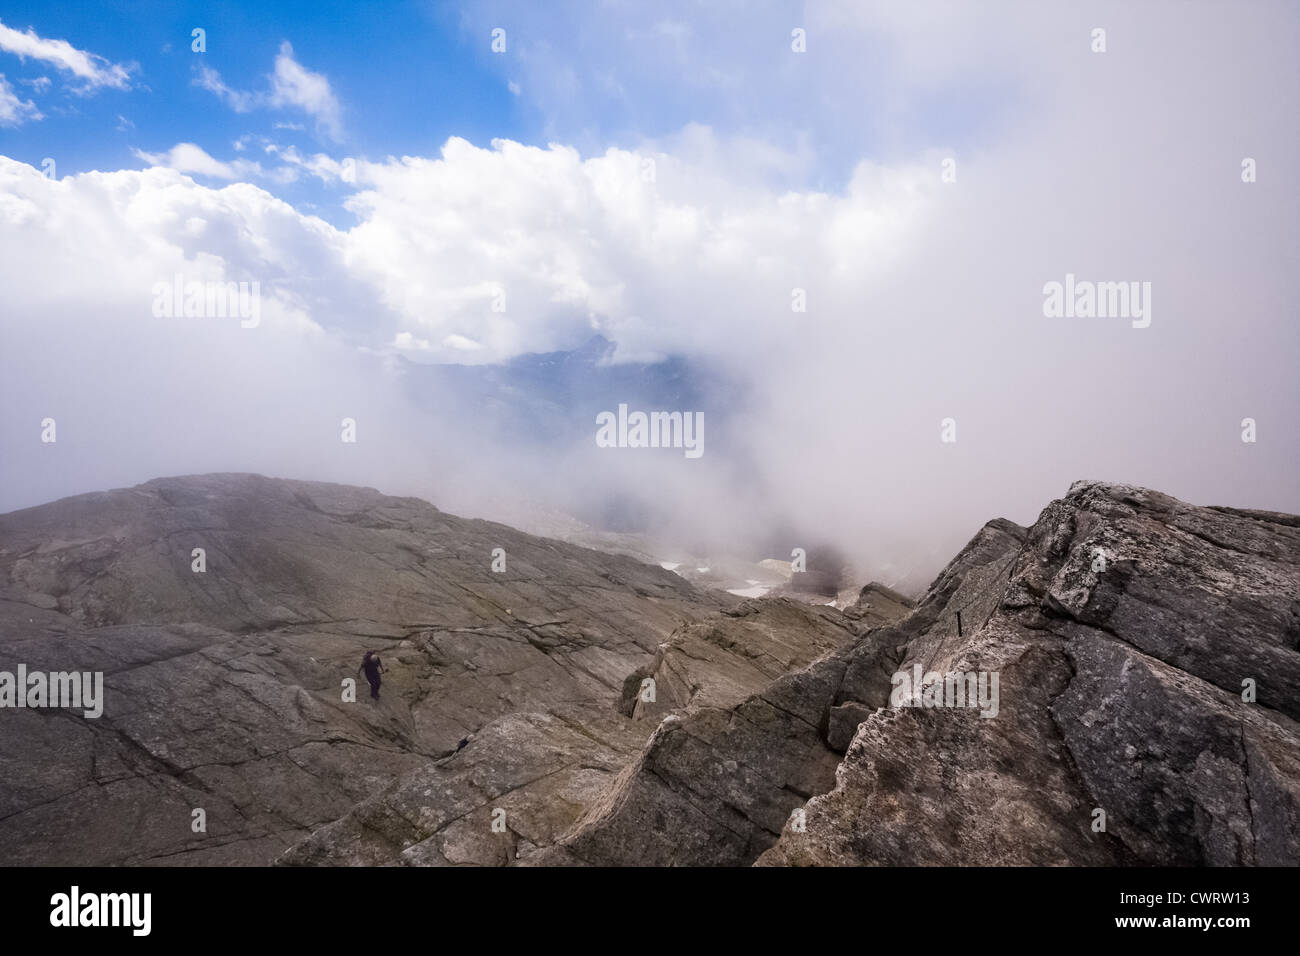 A hiker descends a large slab of rock while on route to Monte Moro Pass on the borders of Switzerland and Italy. Stock Photo